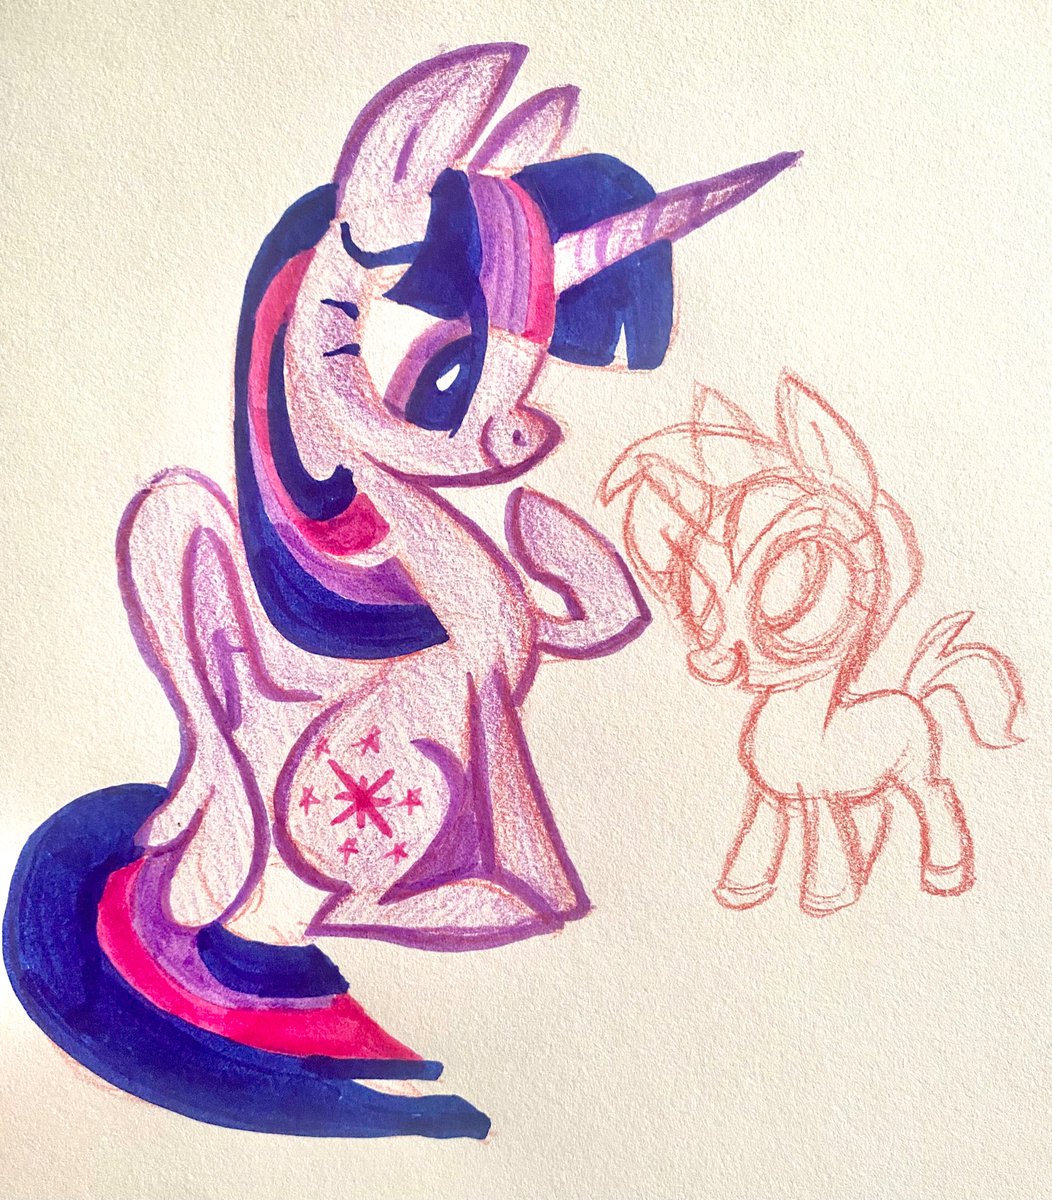 「More marker and pencil ponies cause colo」|Jane Walker 🎉のイラスト